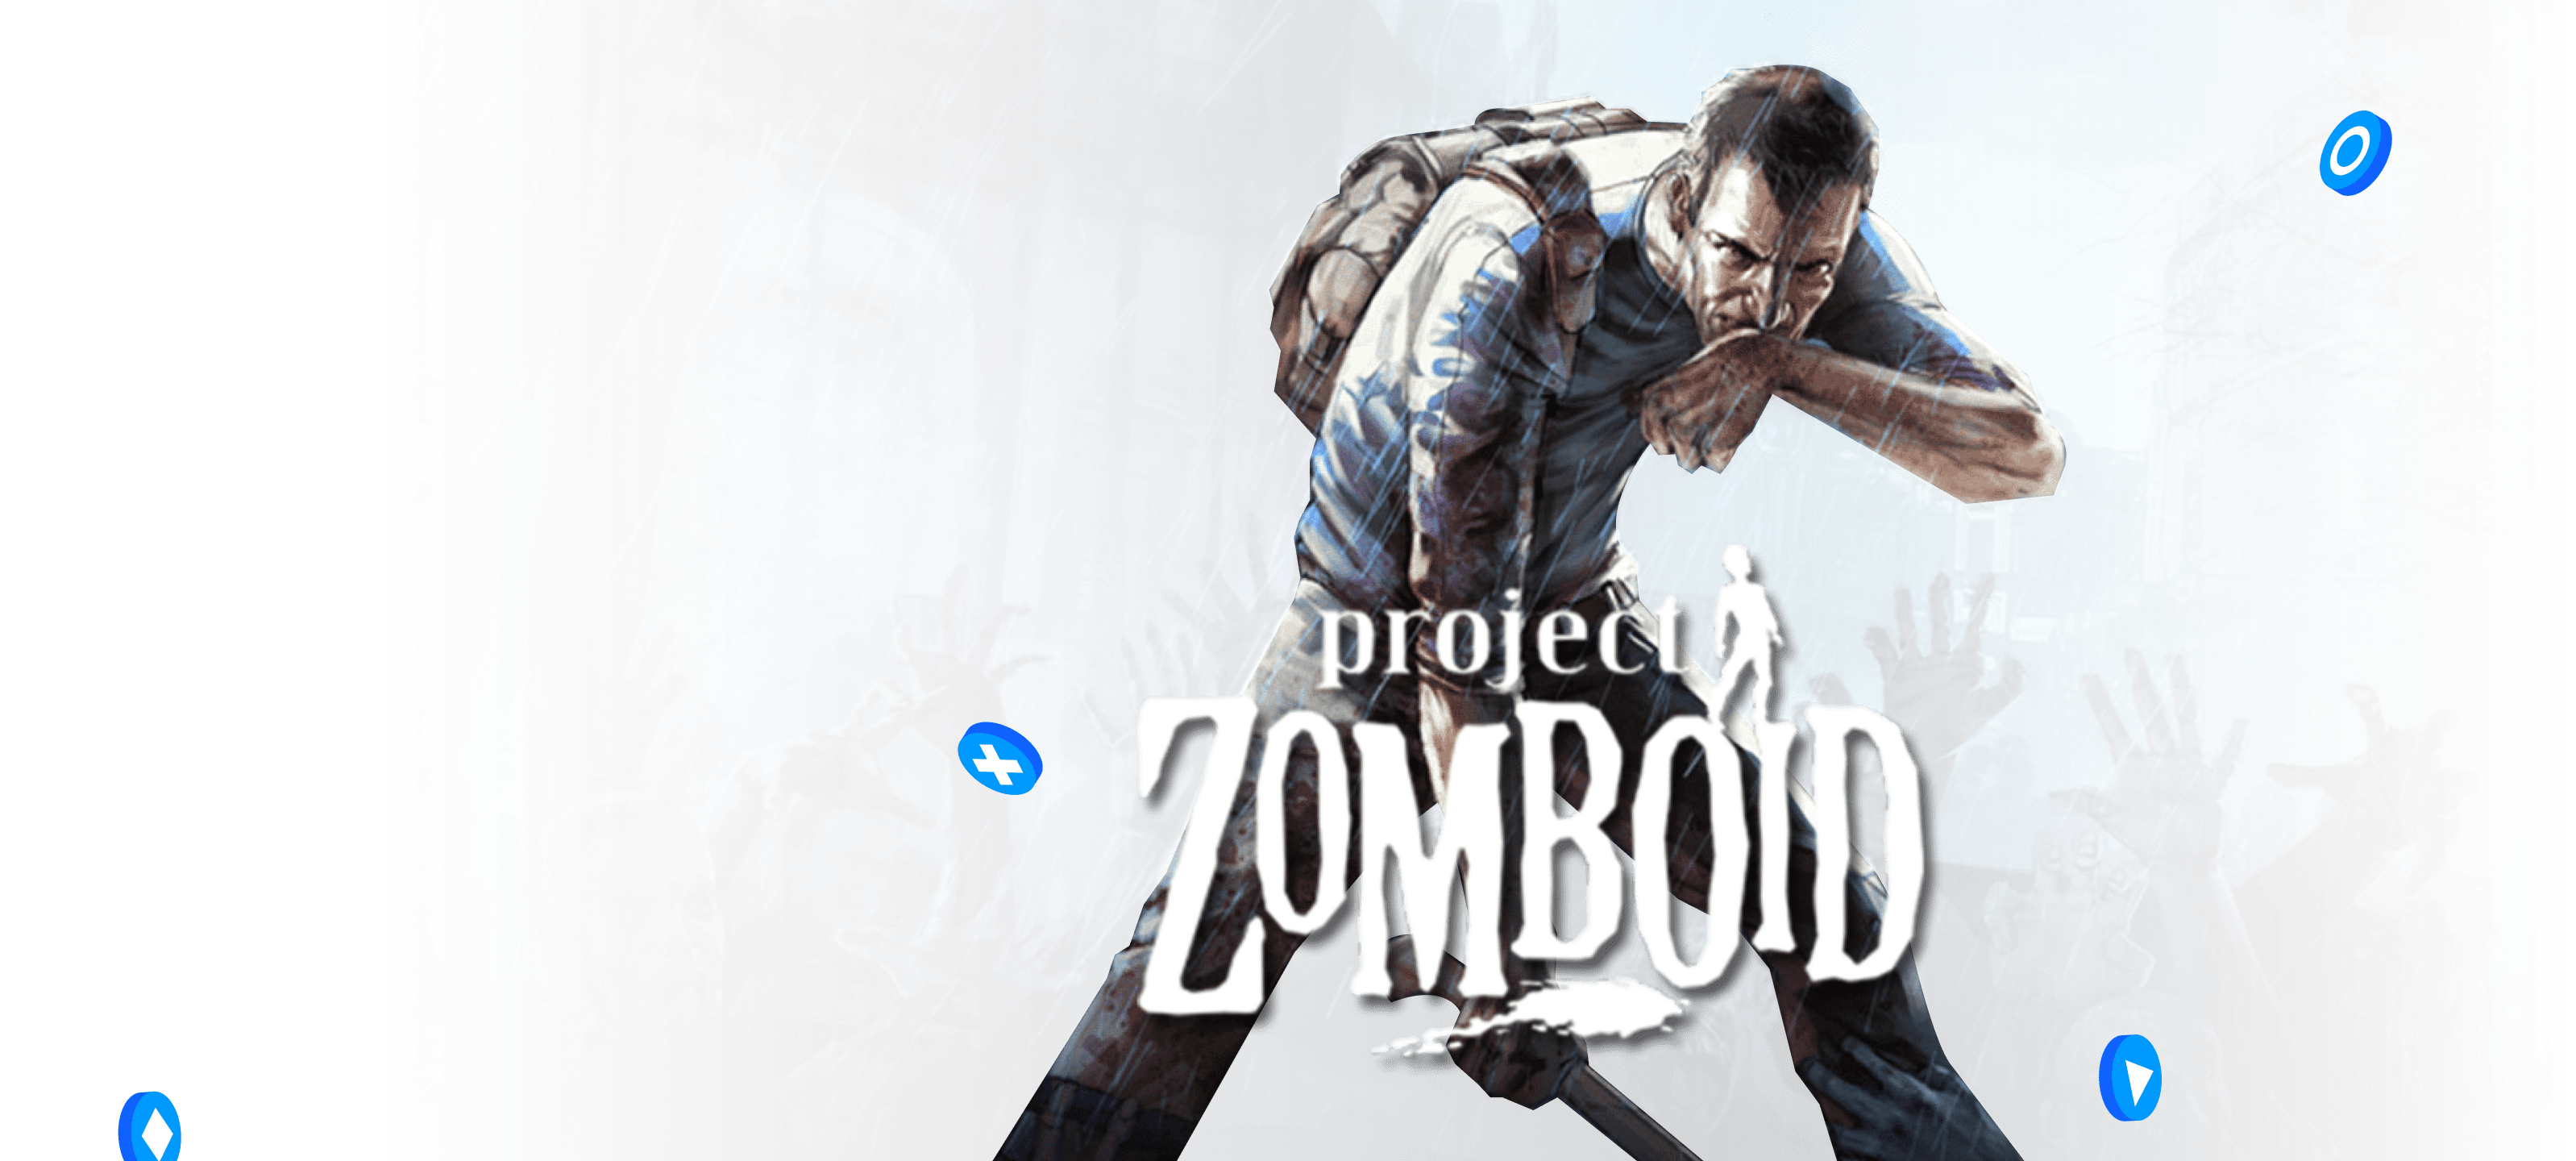 Project Zomboid - Game Server - Start your Project Zomboid game server hosting today!